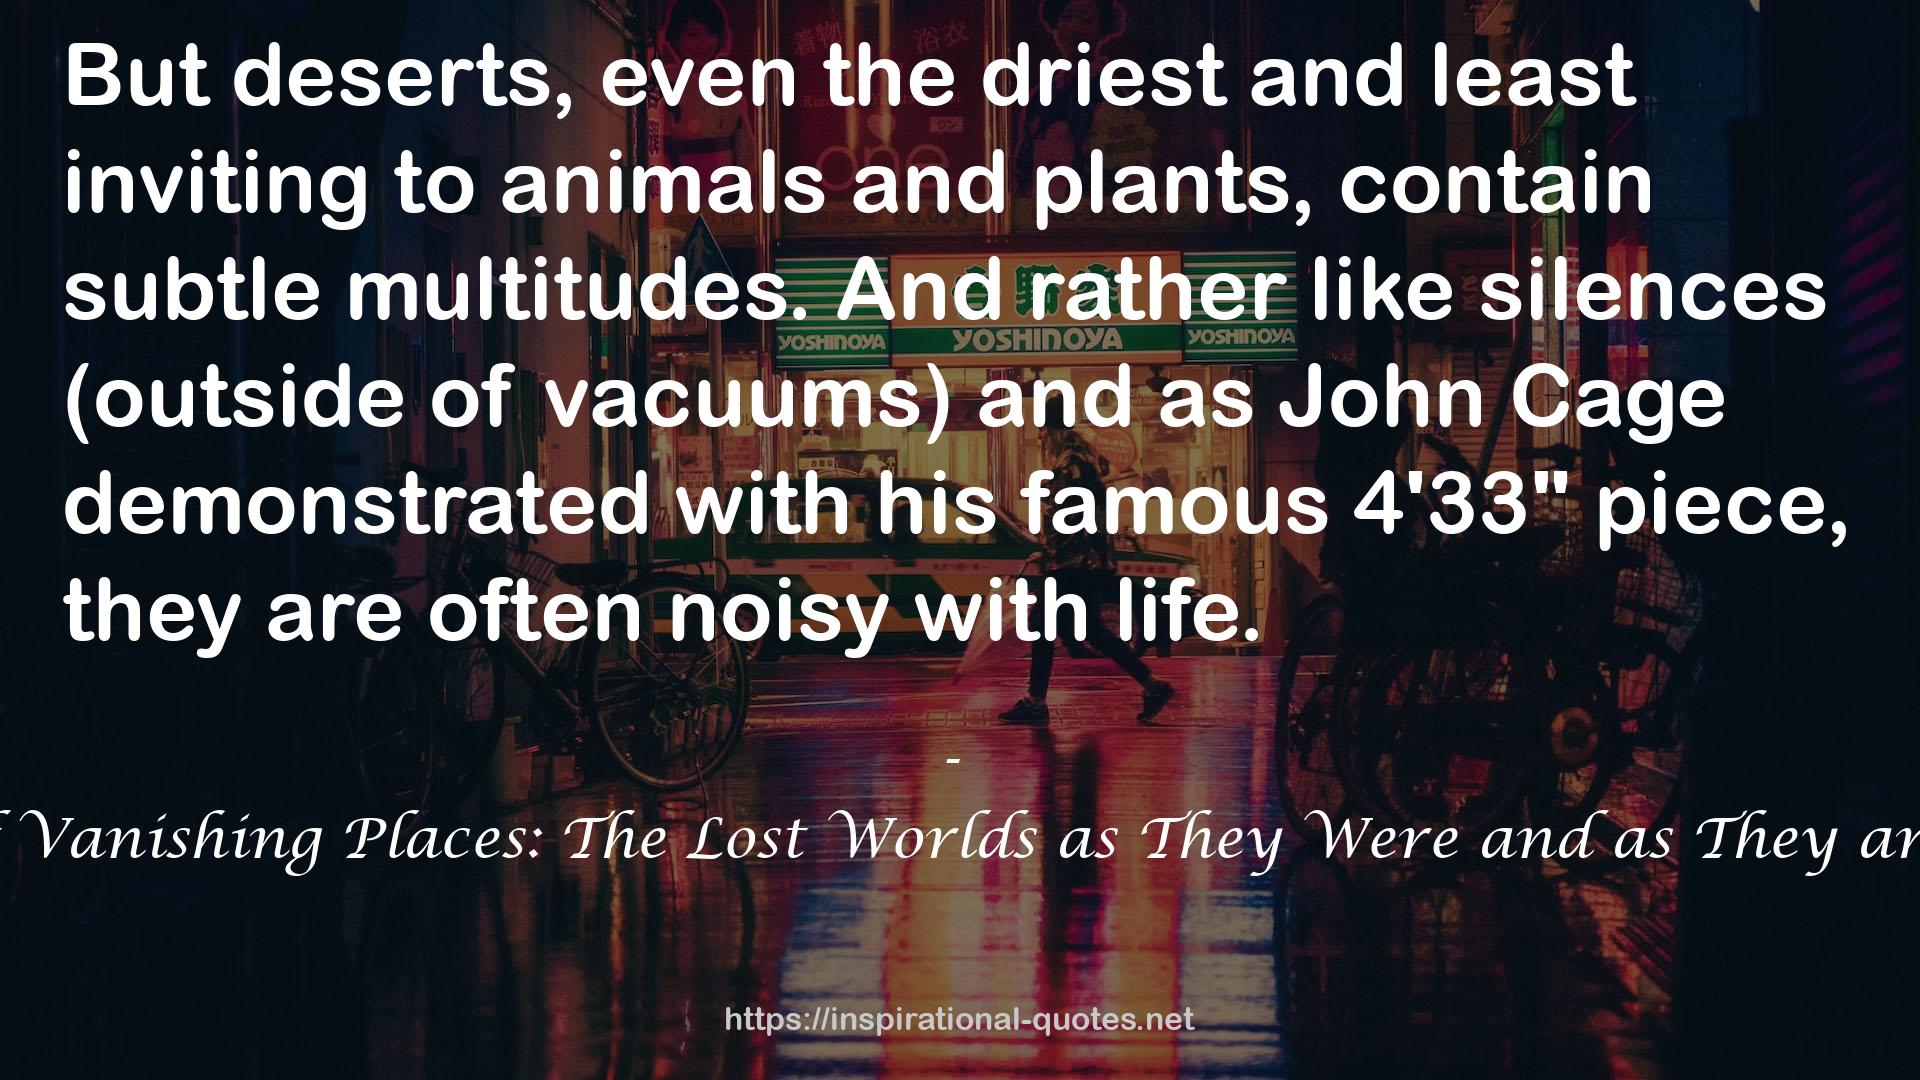 Atlas of Vanishing Places: The Lost Worlds as They Were and as They are Today QUOTES